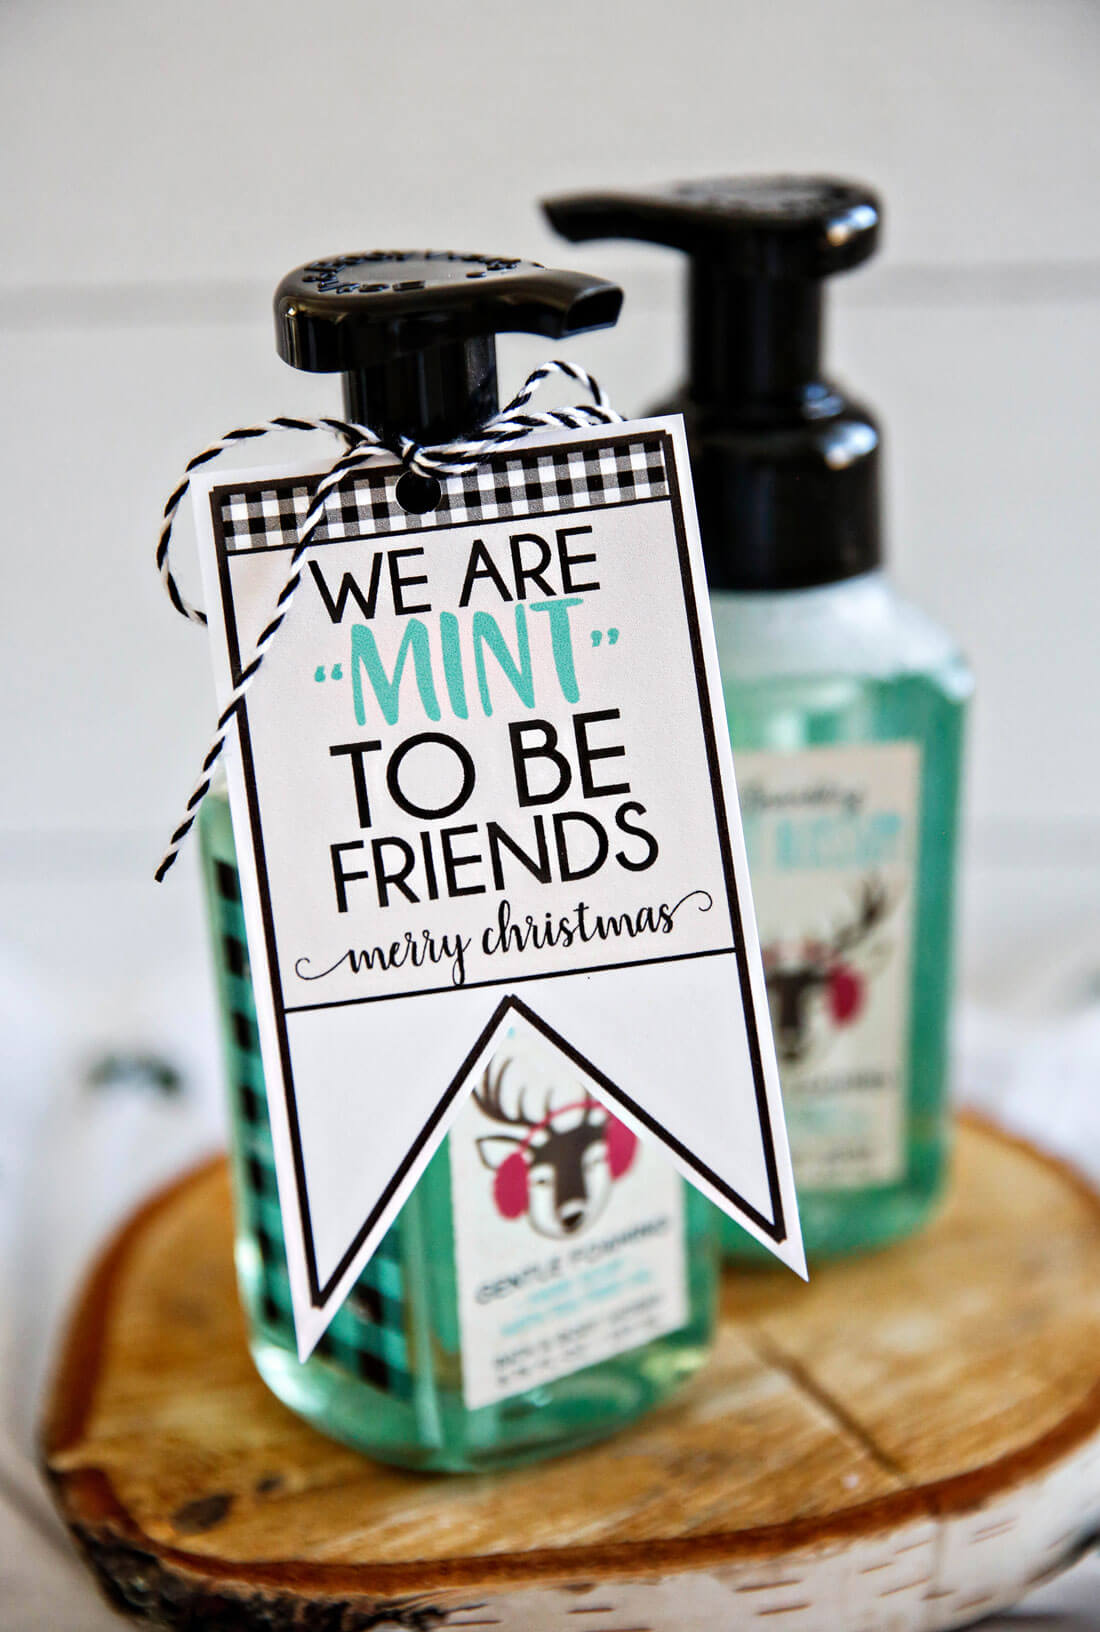 We're "mint to be friends" Christmas tags - download these cute printable tags via www.thirtyhandmadedays.com